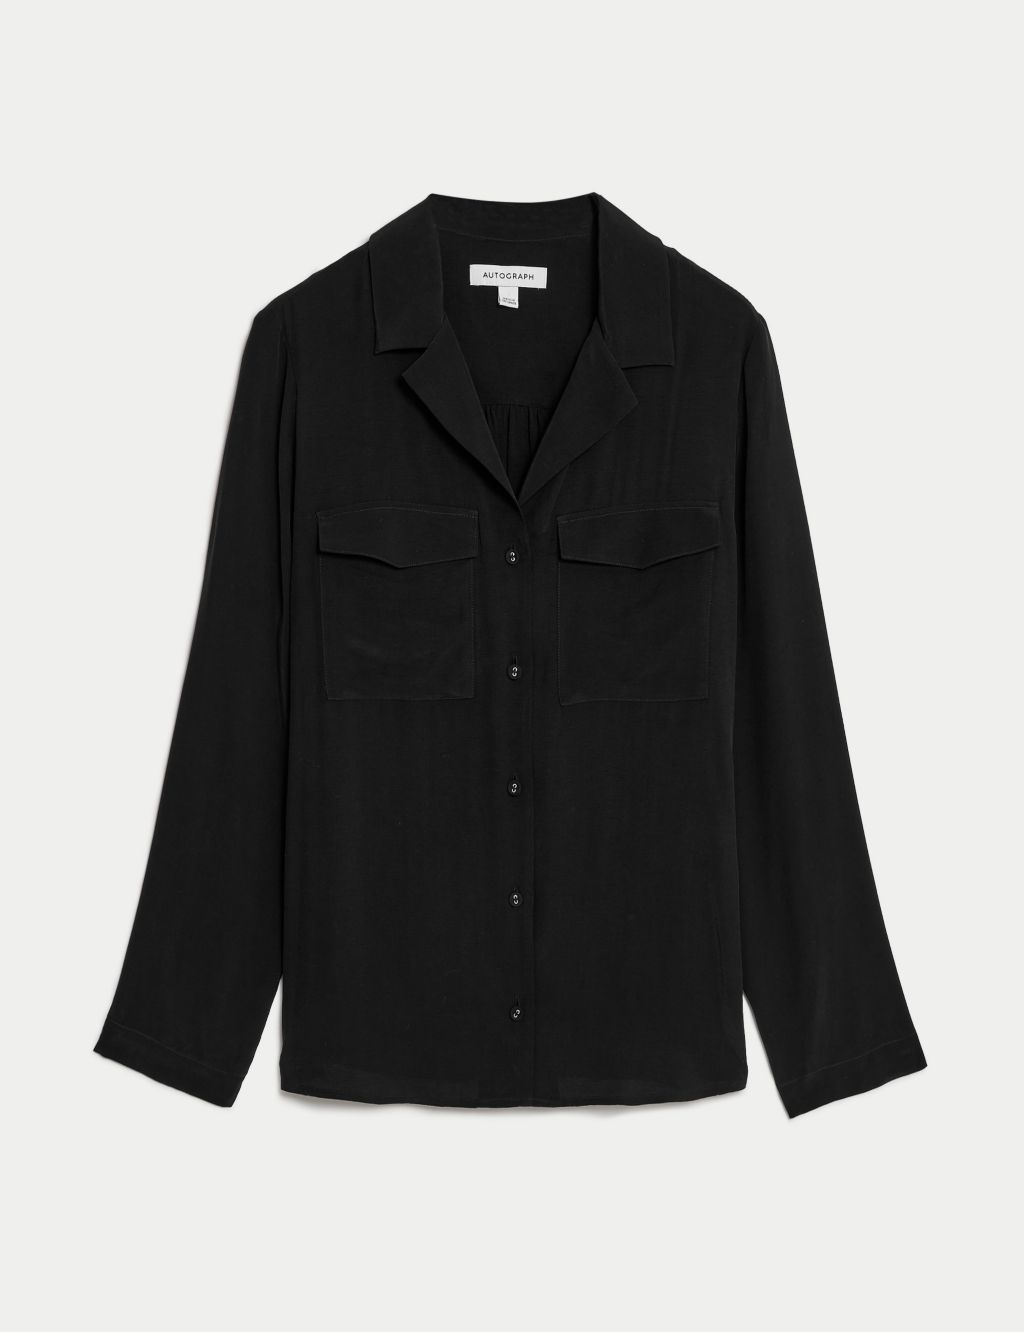 Cupro Rich Collared Shirt image 2